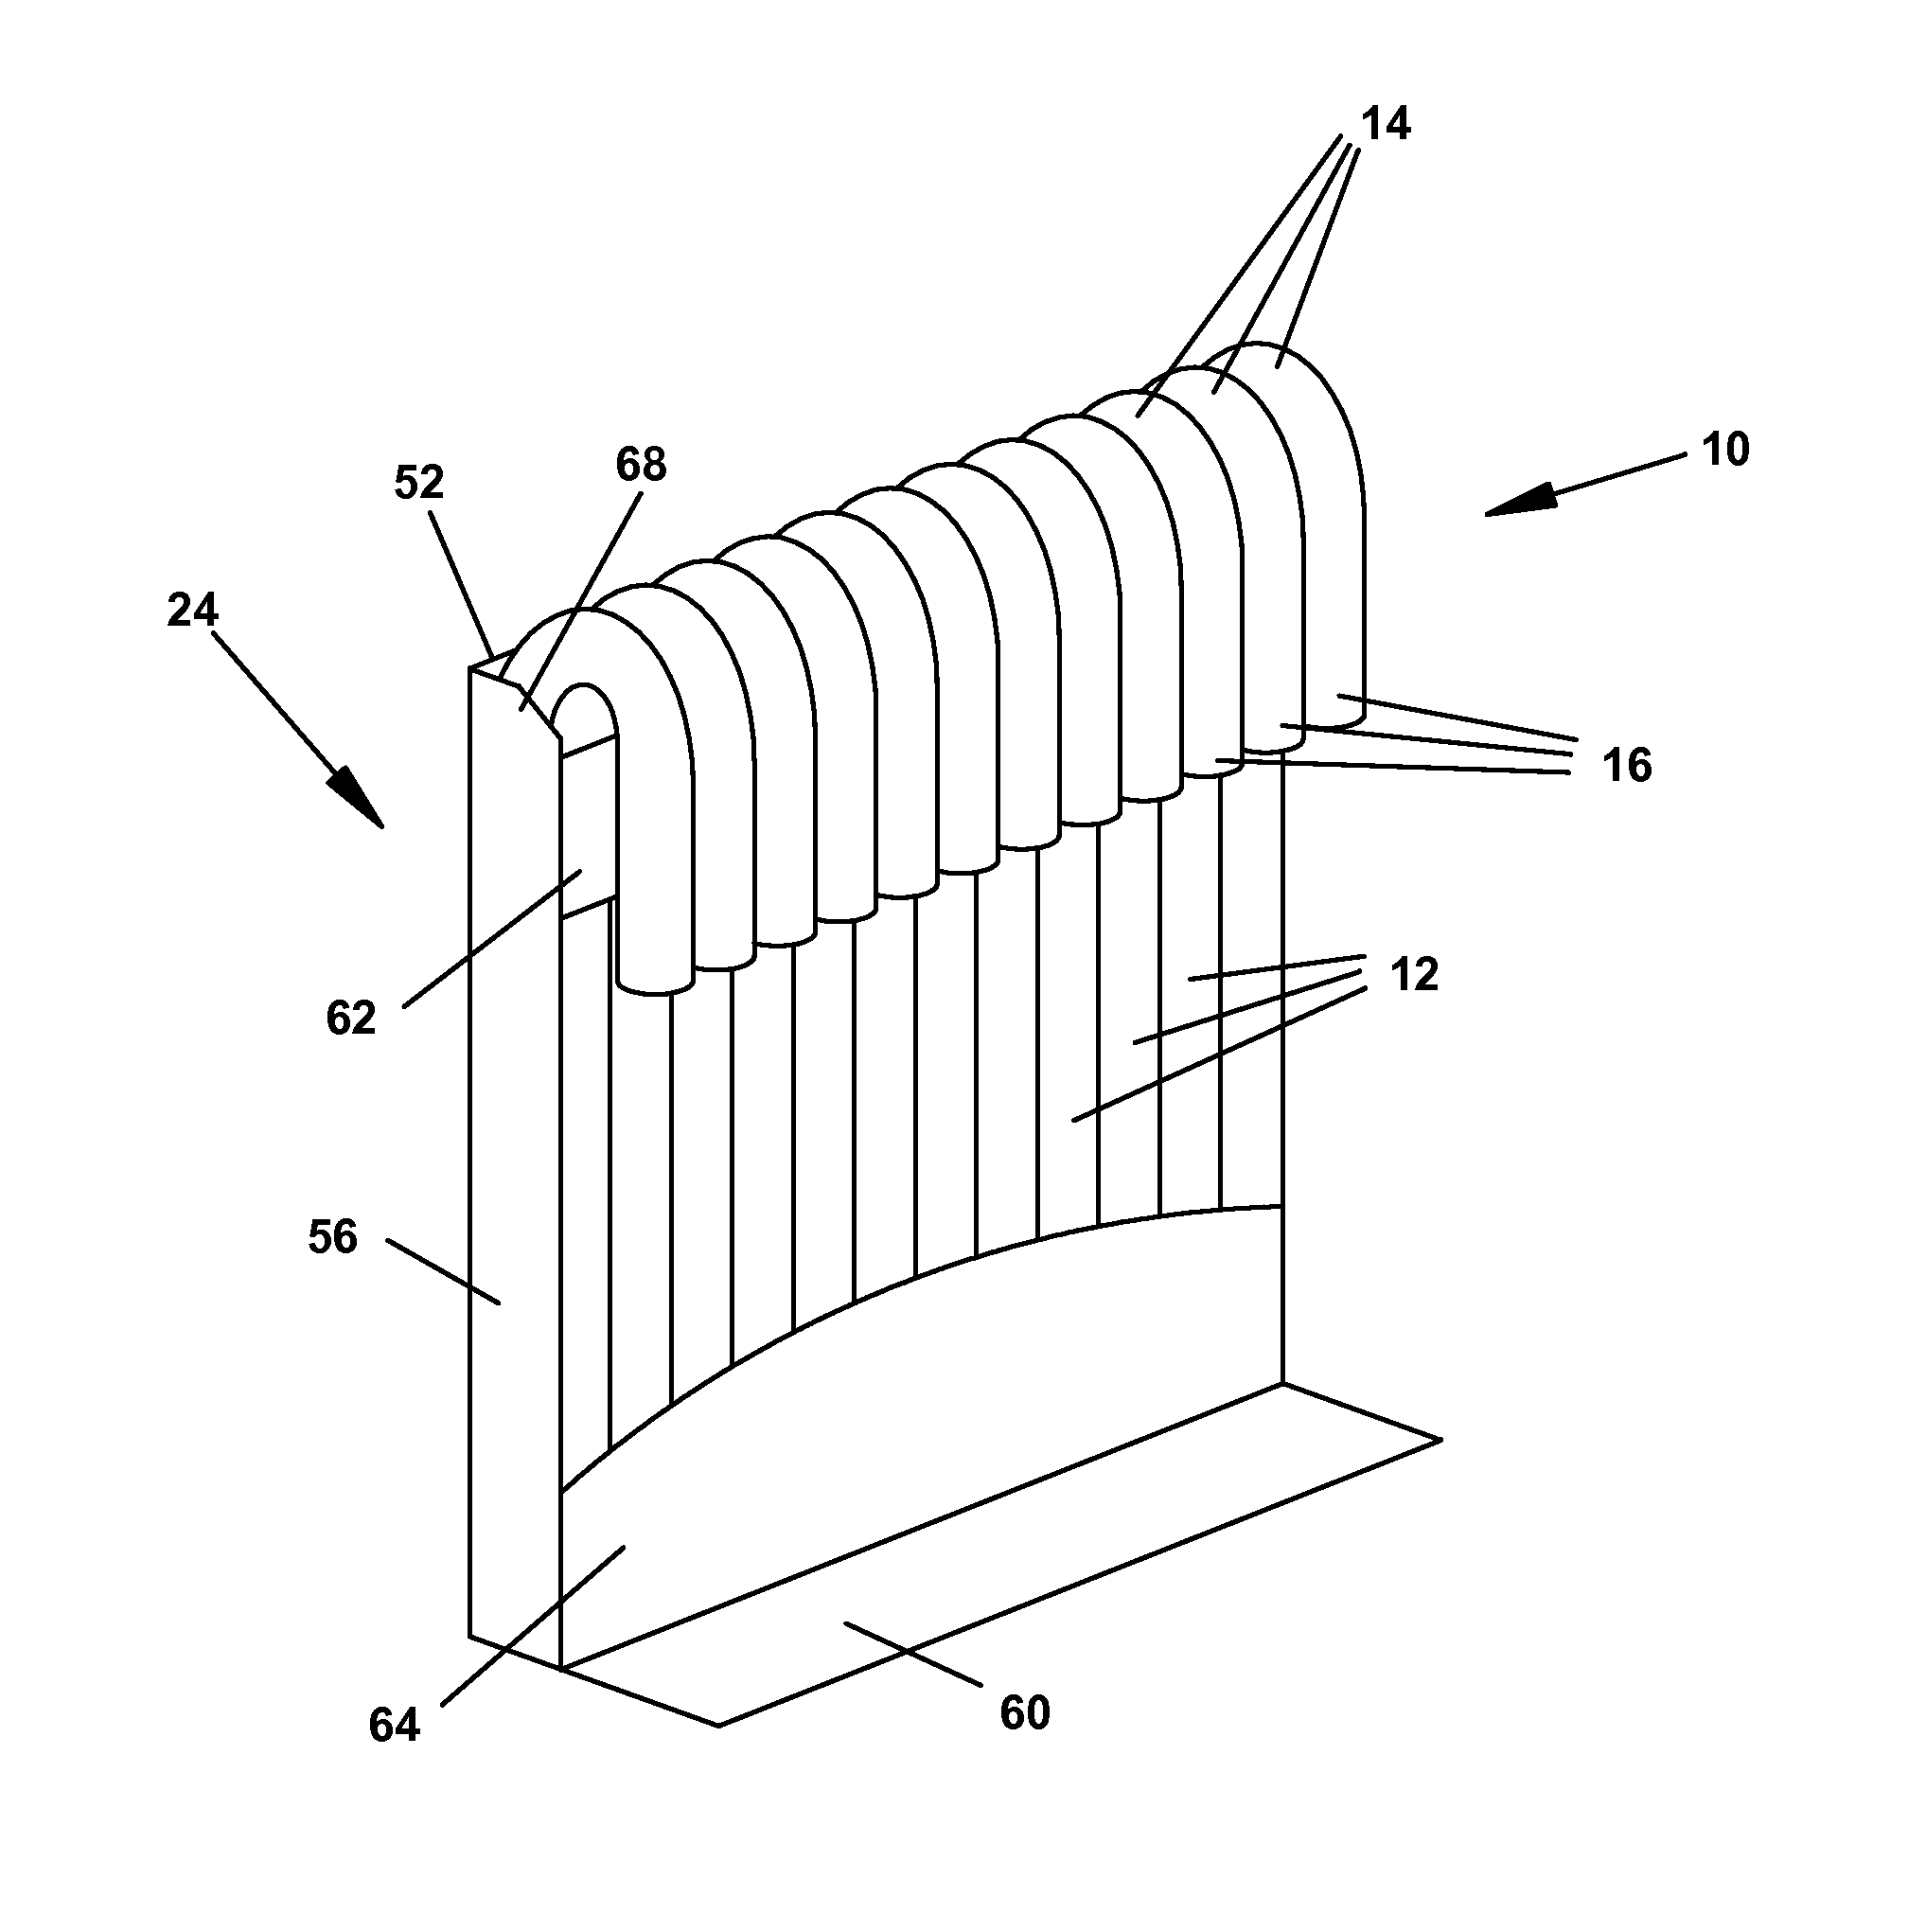 Candy Manufacturing Support Pallet and Method of Use